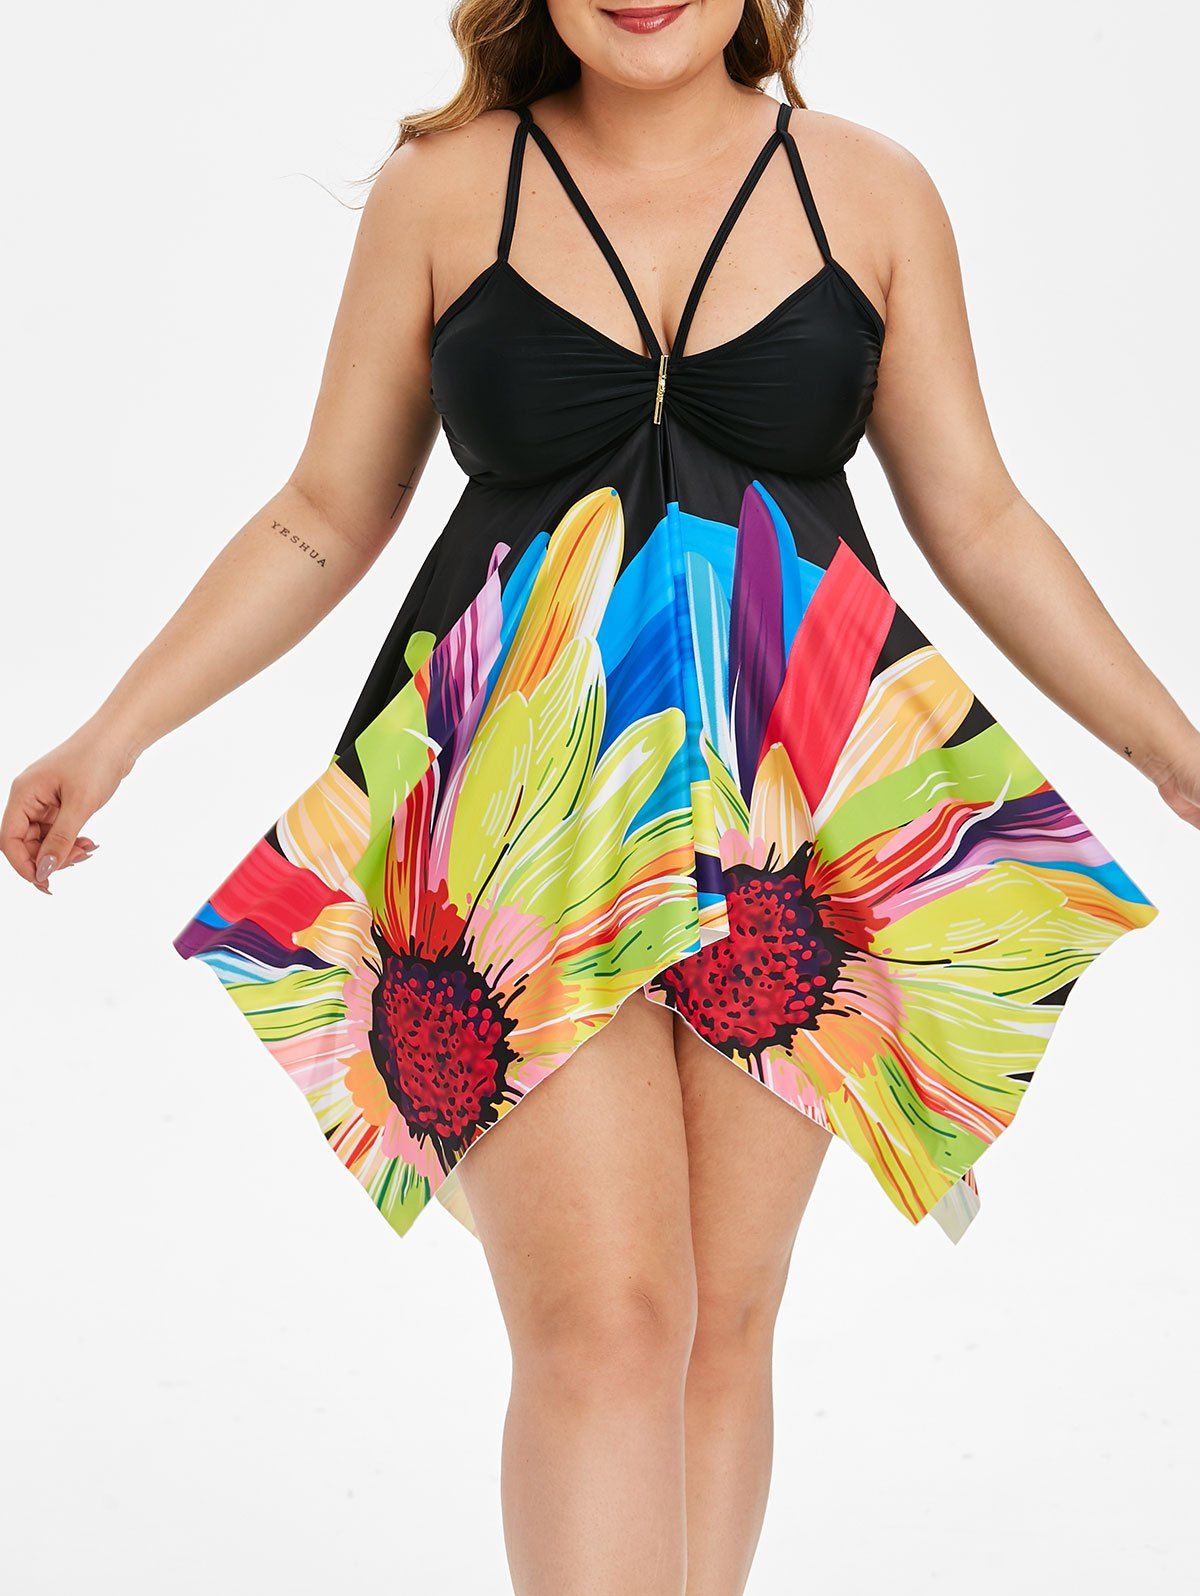 Floral Strappy Ruched Handkerchief Plus Size Tankini Swimsuit - BLACK L